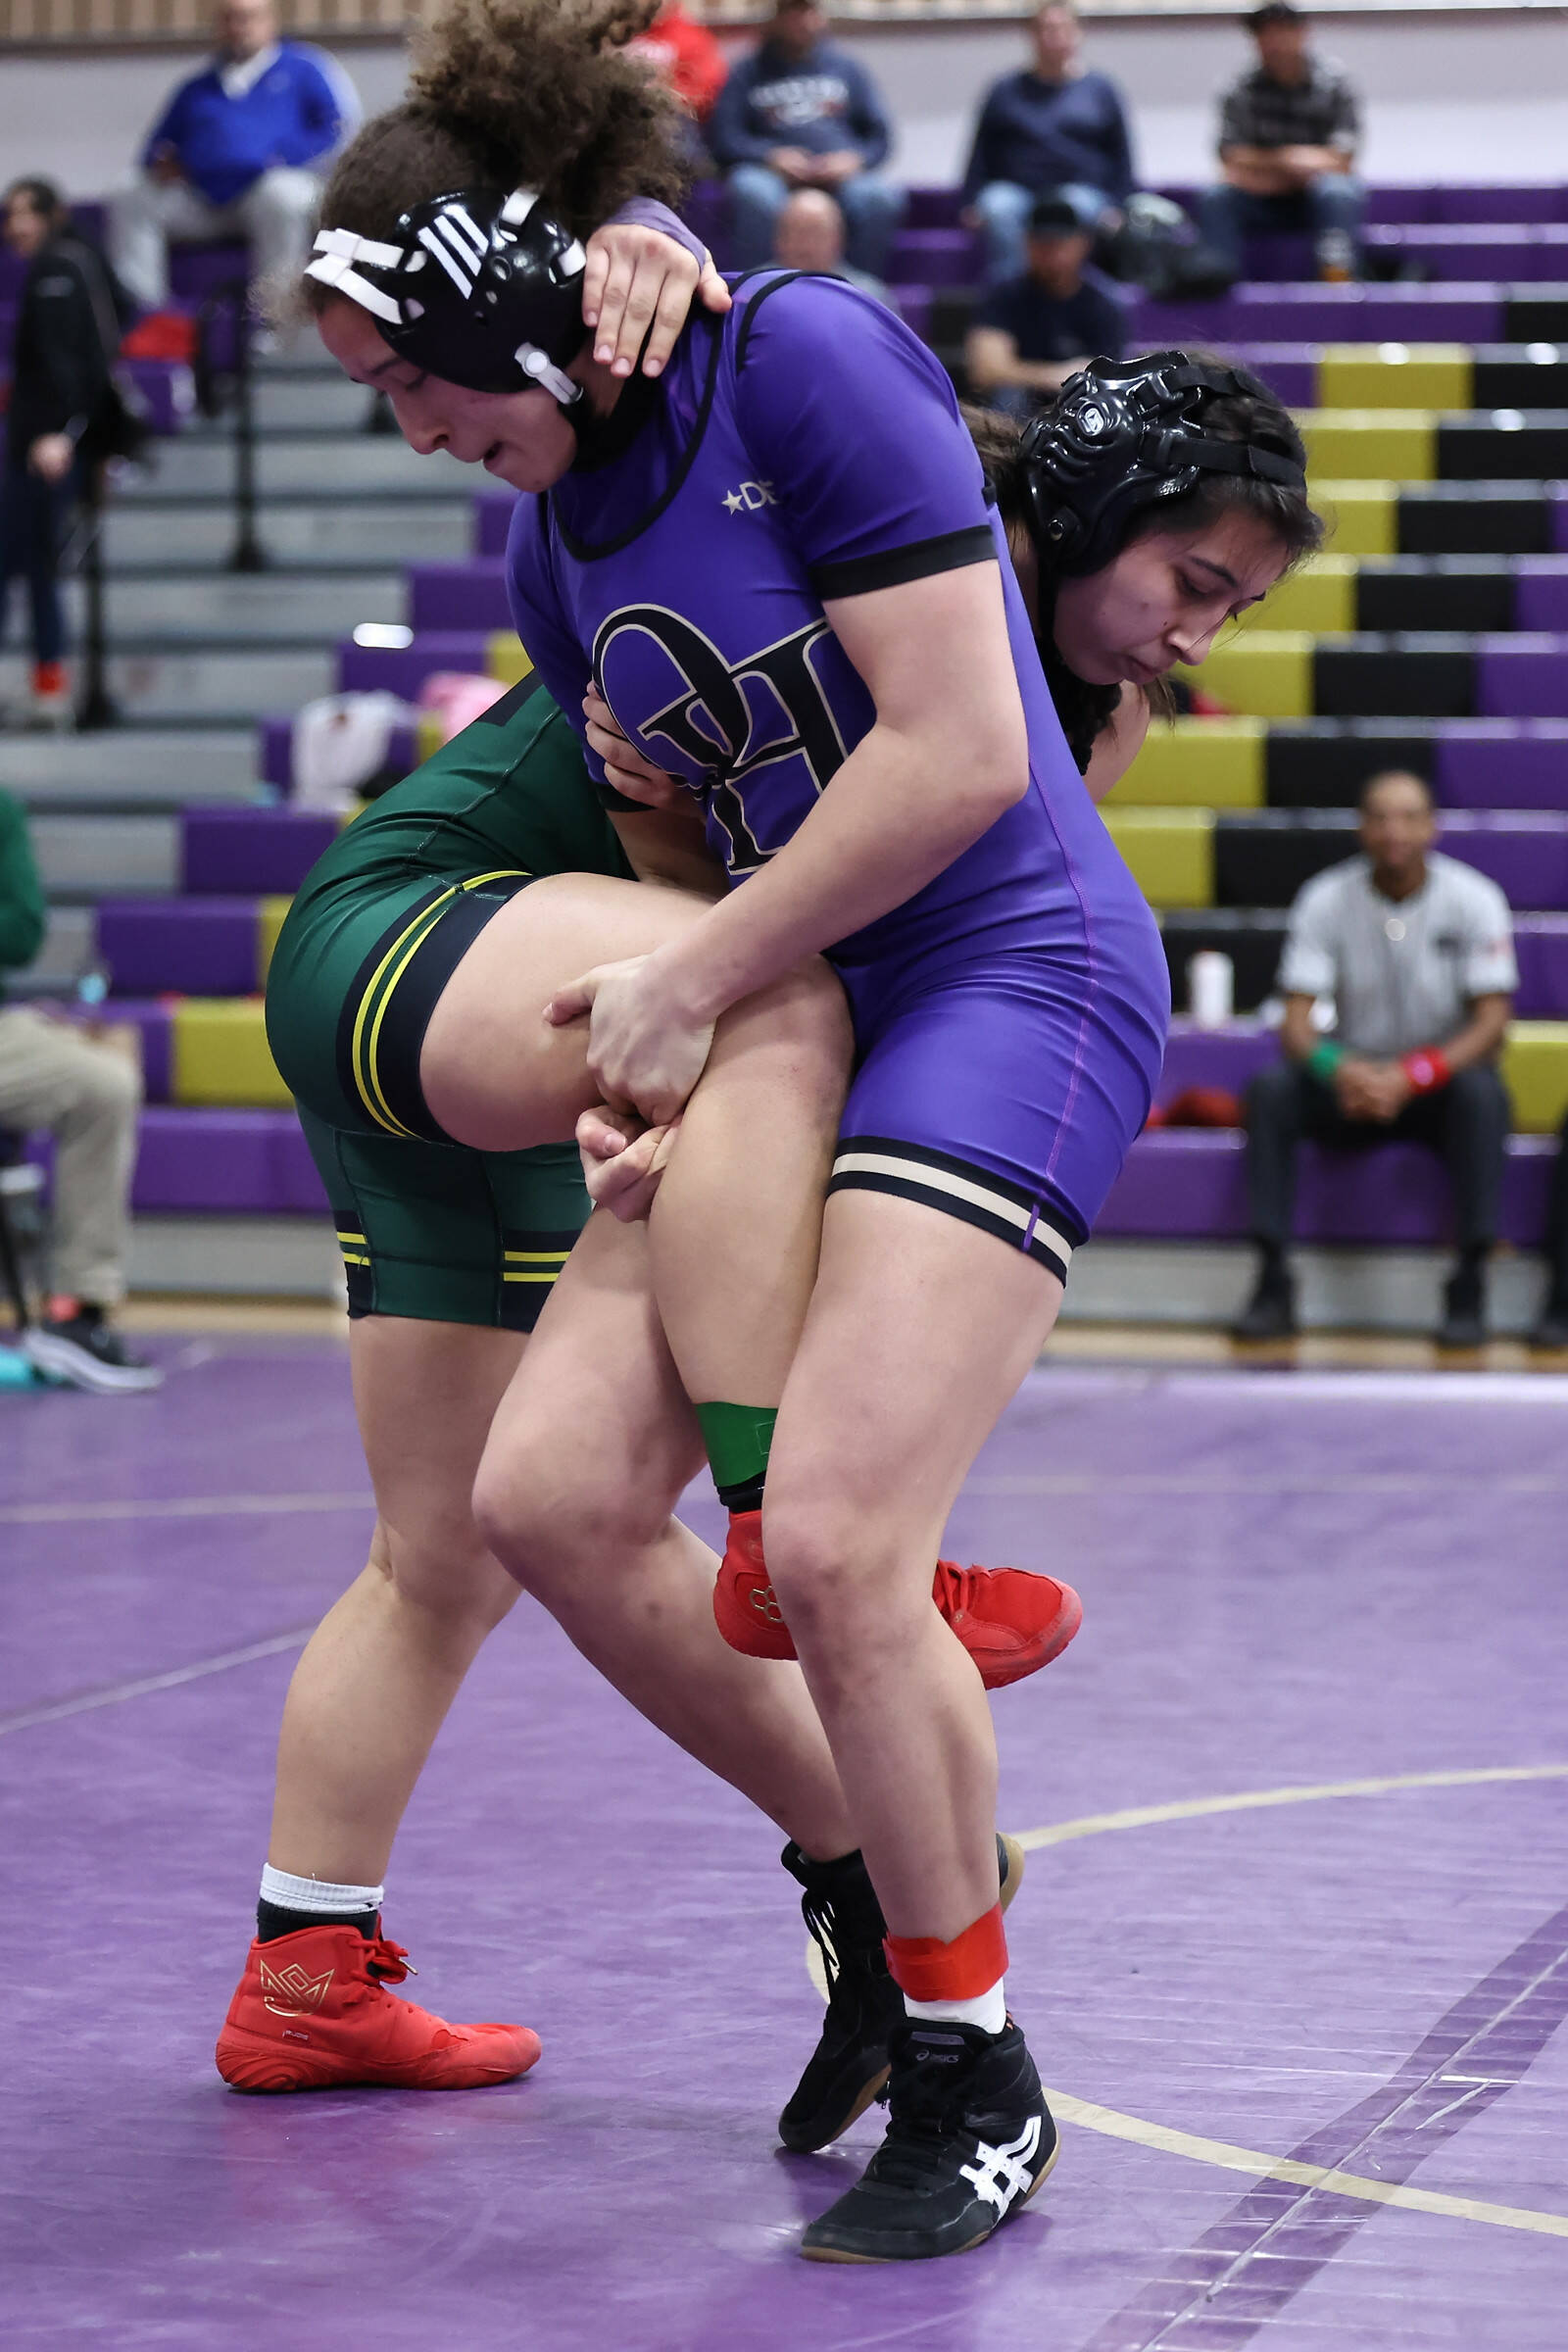 Oak Harbor’s Brianna Richard wrestles an opponent during the Rock Island Rumble tournament that took place Saturday at Oak Harbor High School. Richard placed first in the 135-pound weight class. (Photo by John Fisken)